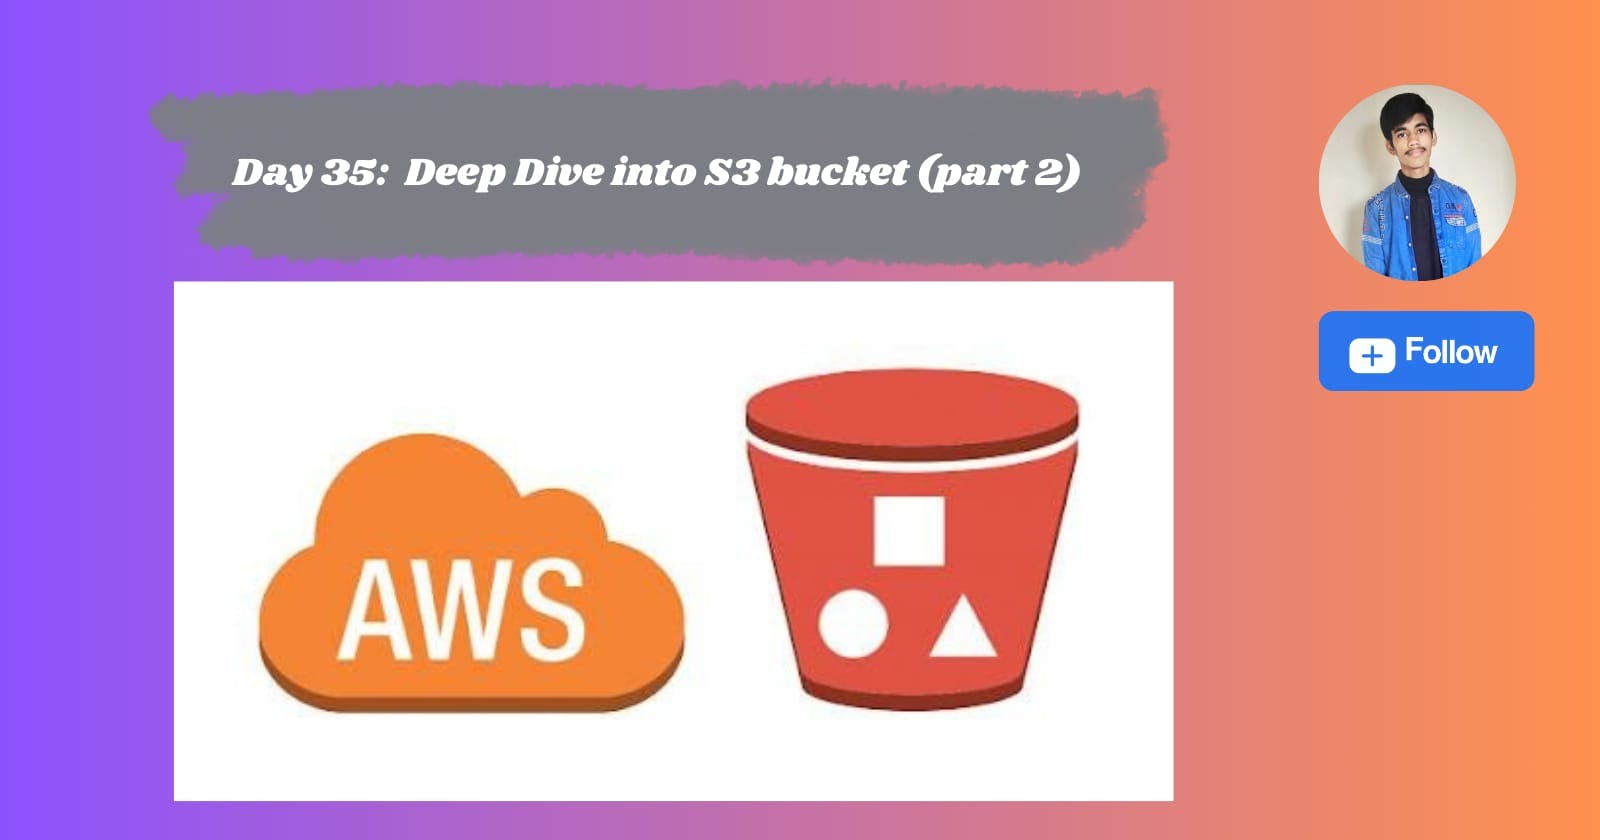 Day 35: Deep dive into S3 bucket (part 2)